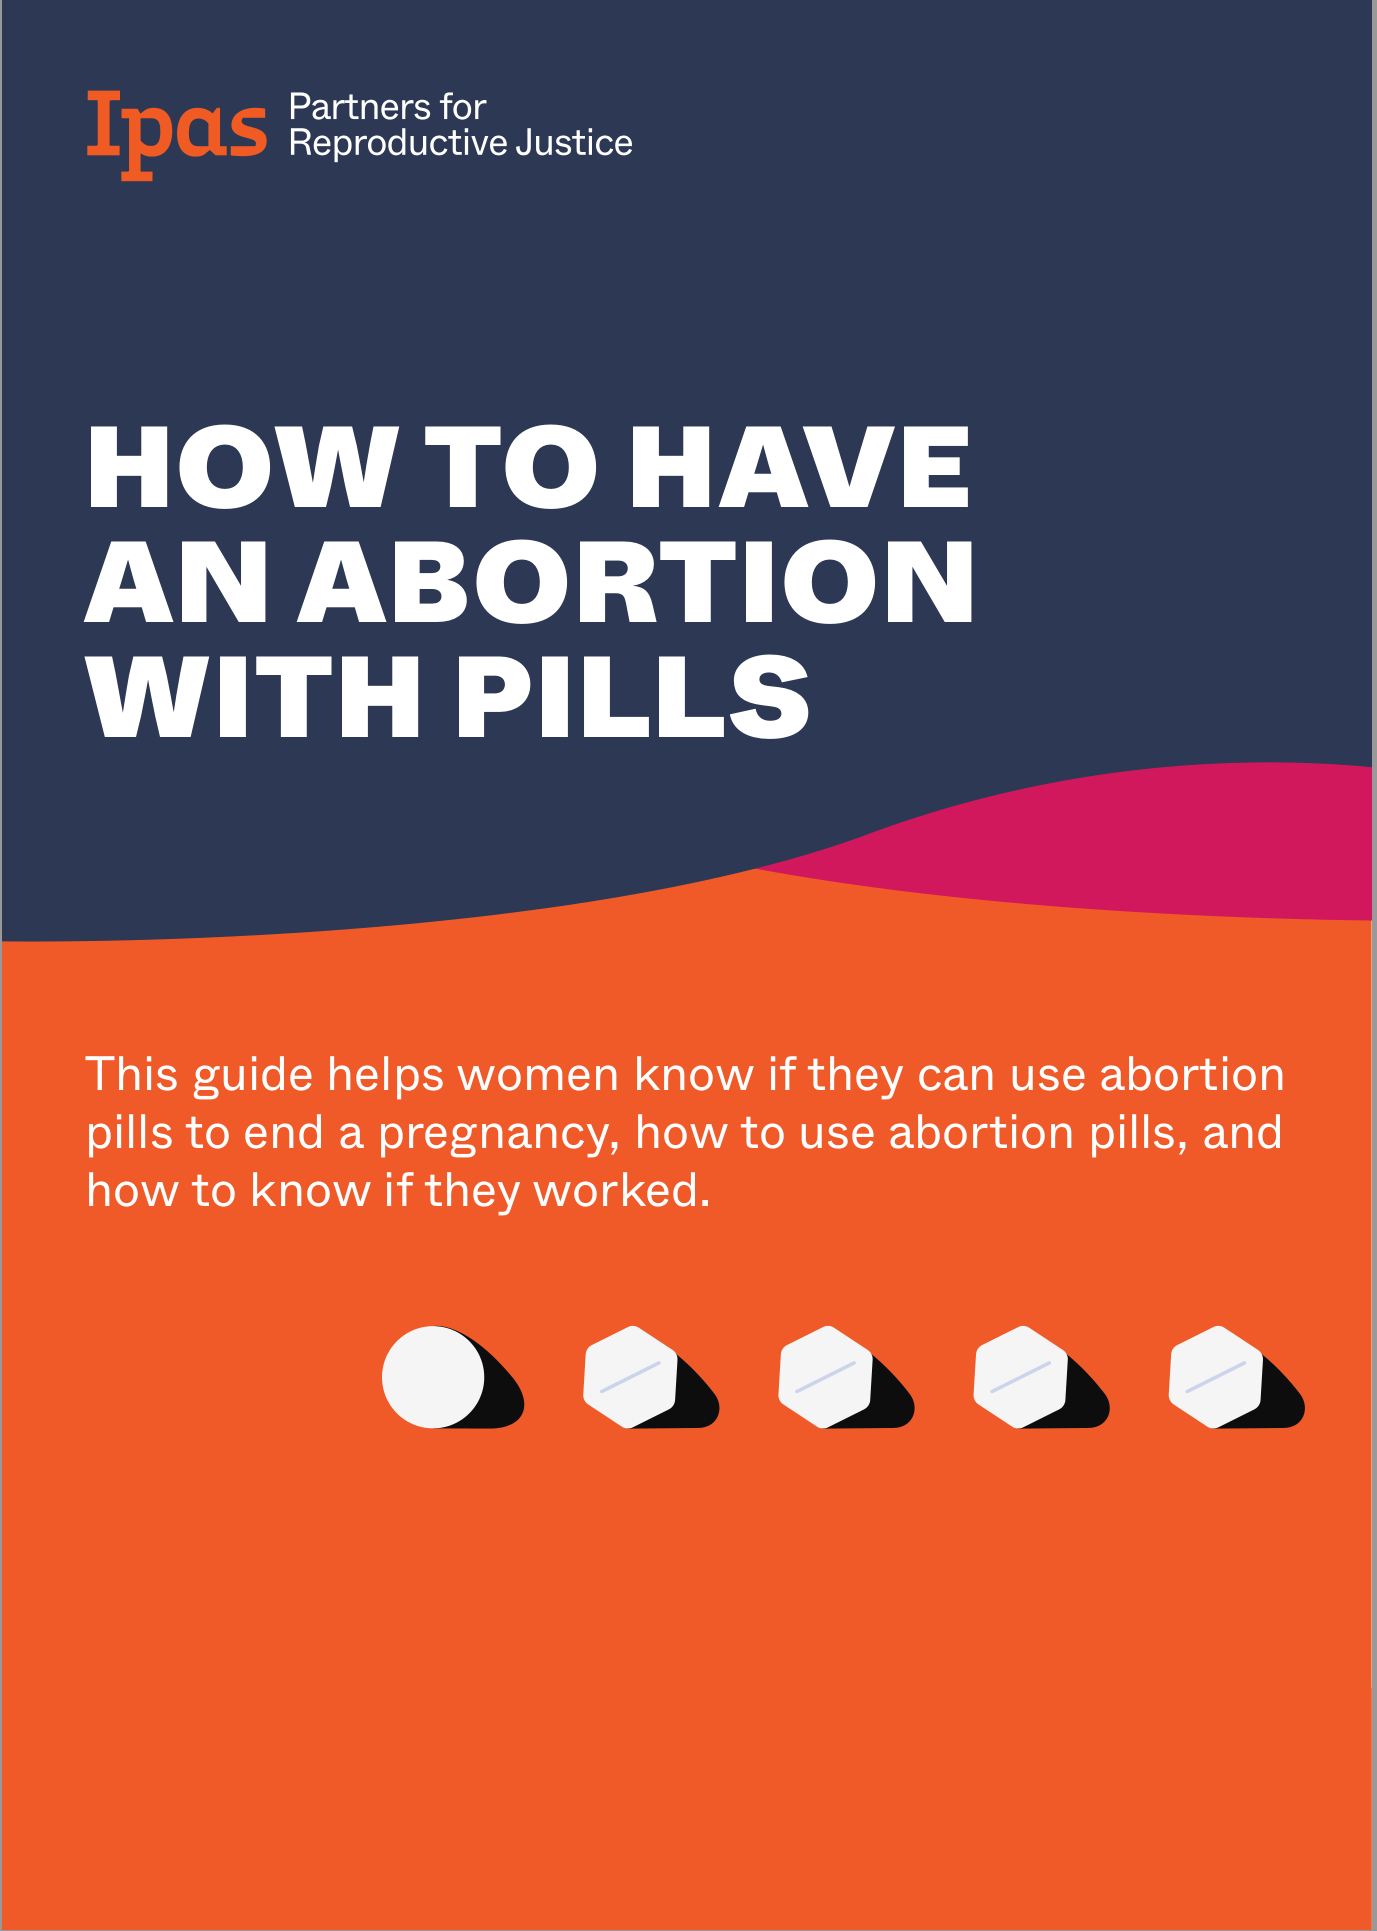 How to have an abortion with pills